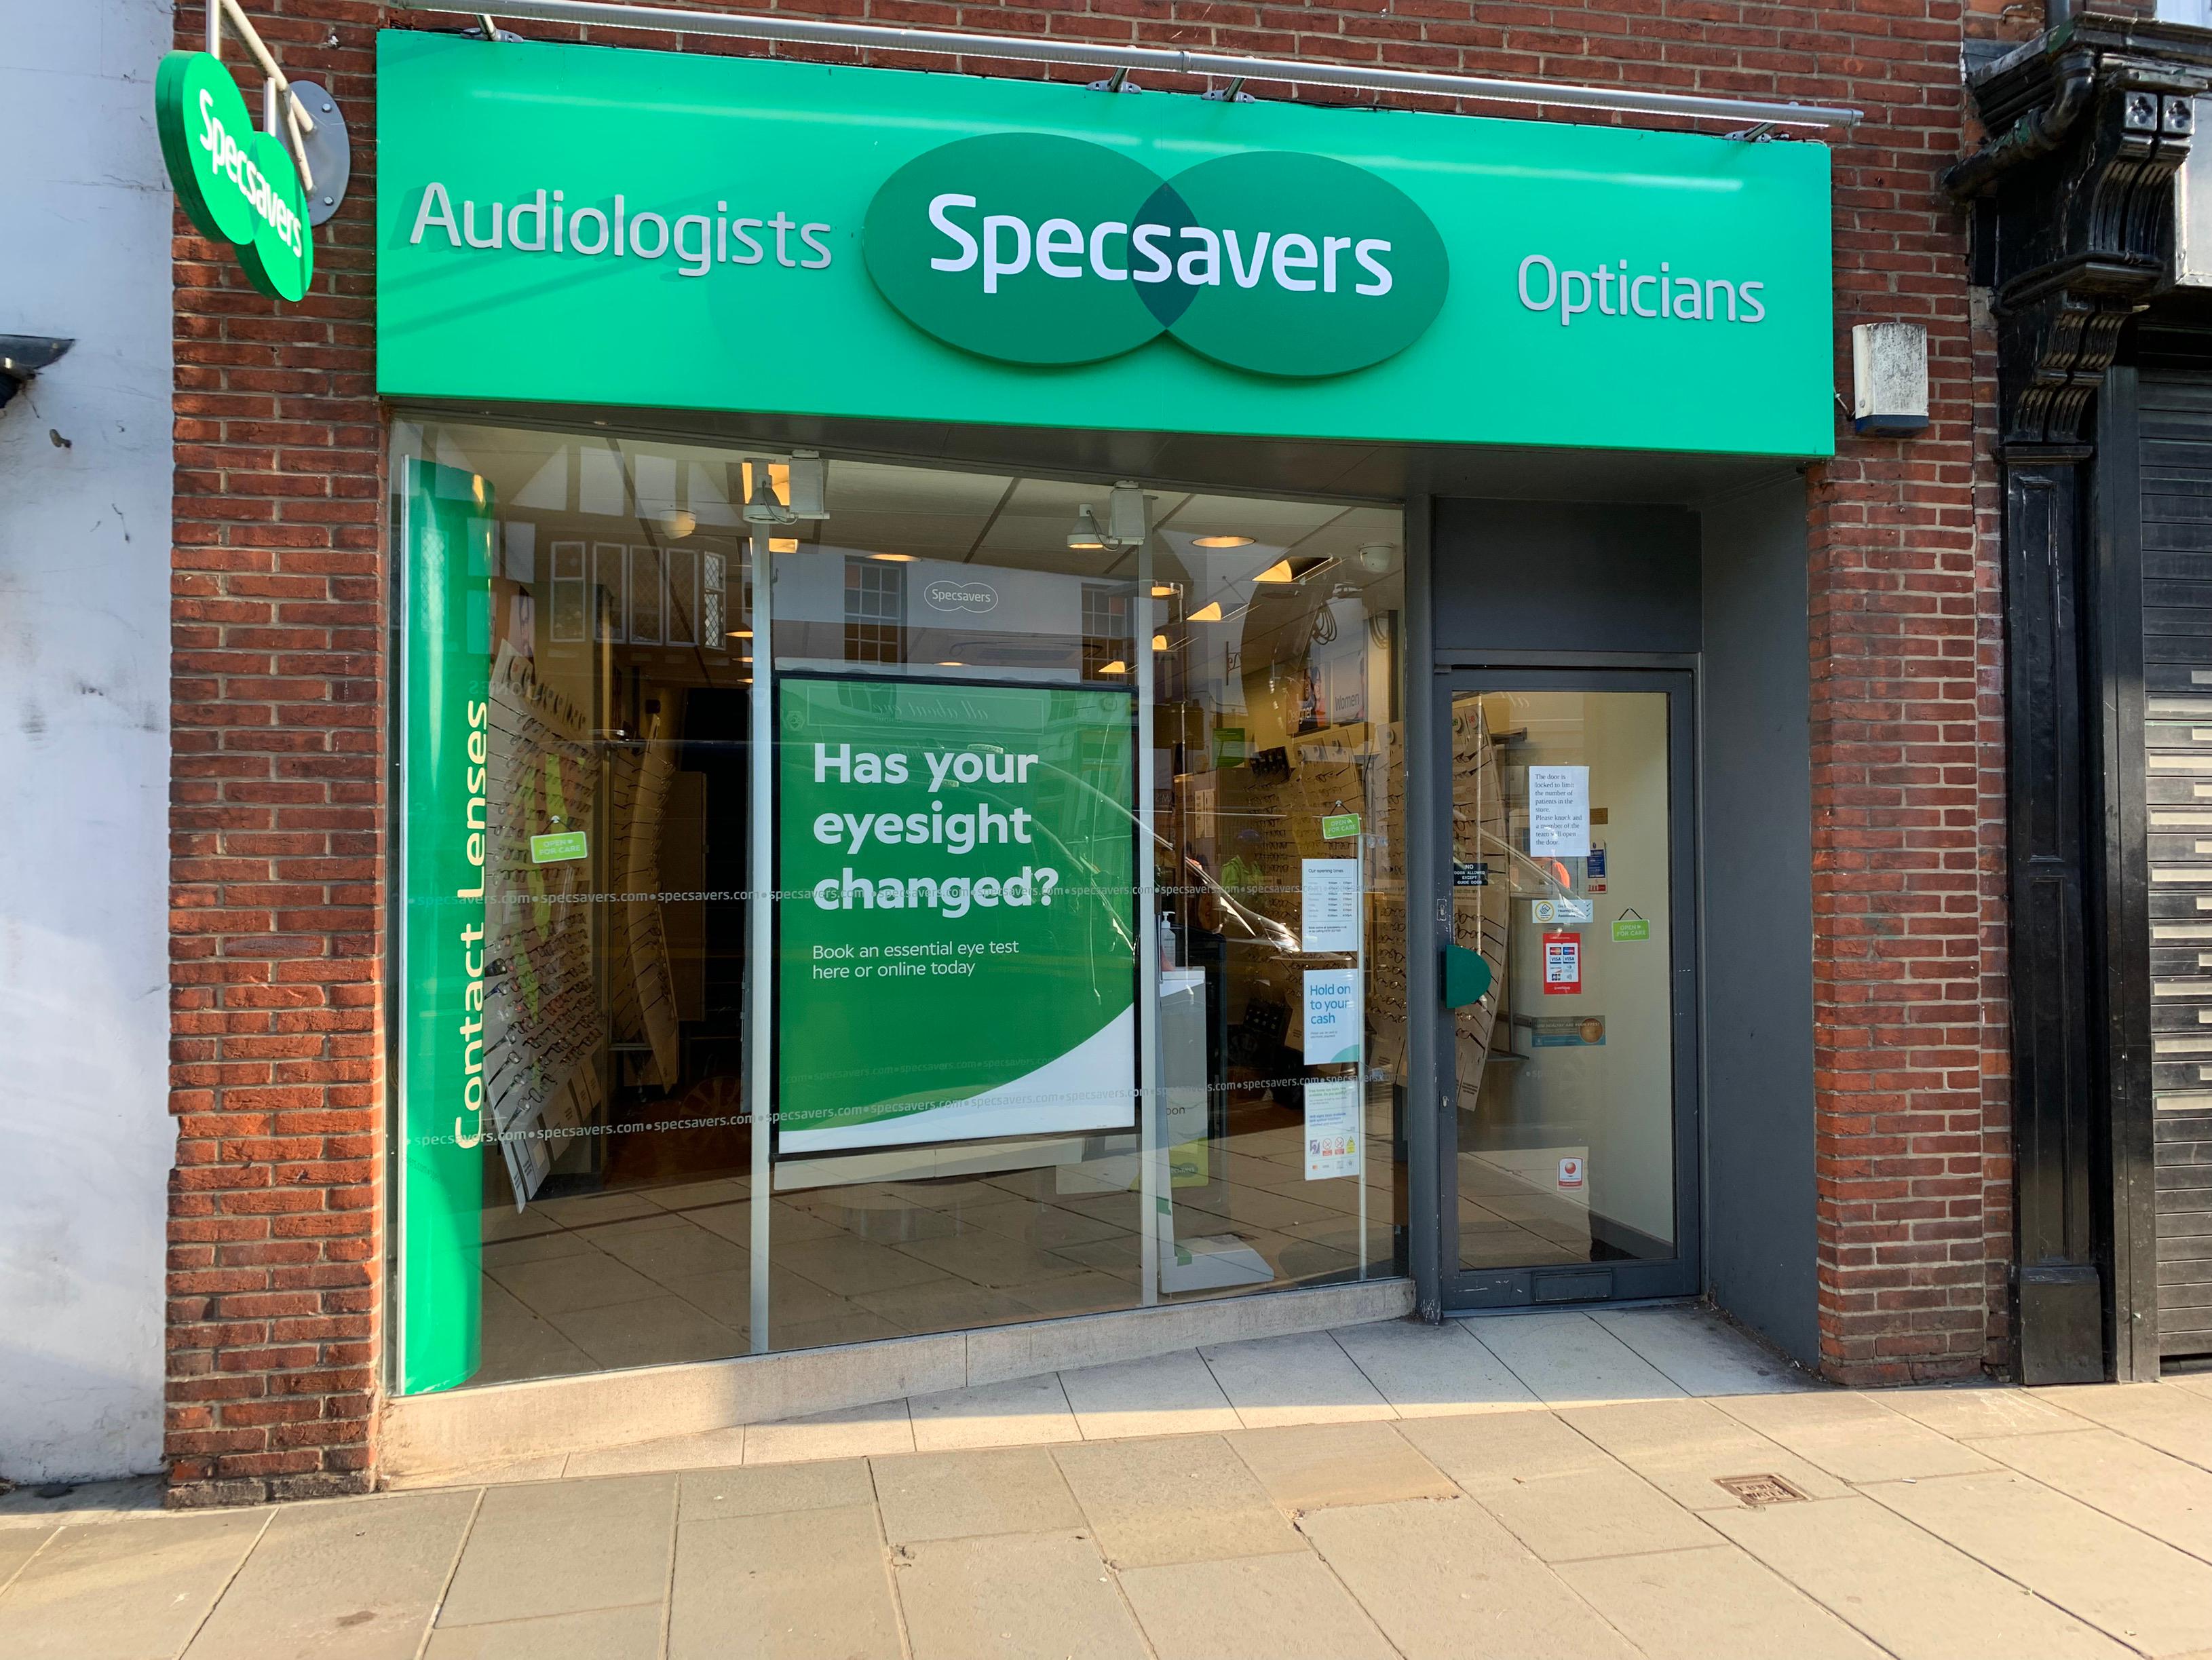 Specsavers Reigate Specsavers Opticians and Audiologists - Reigate Reigate 01737 227920